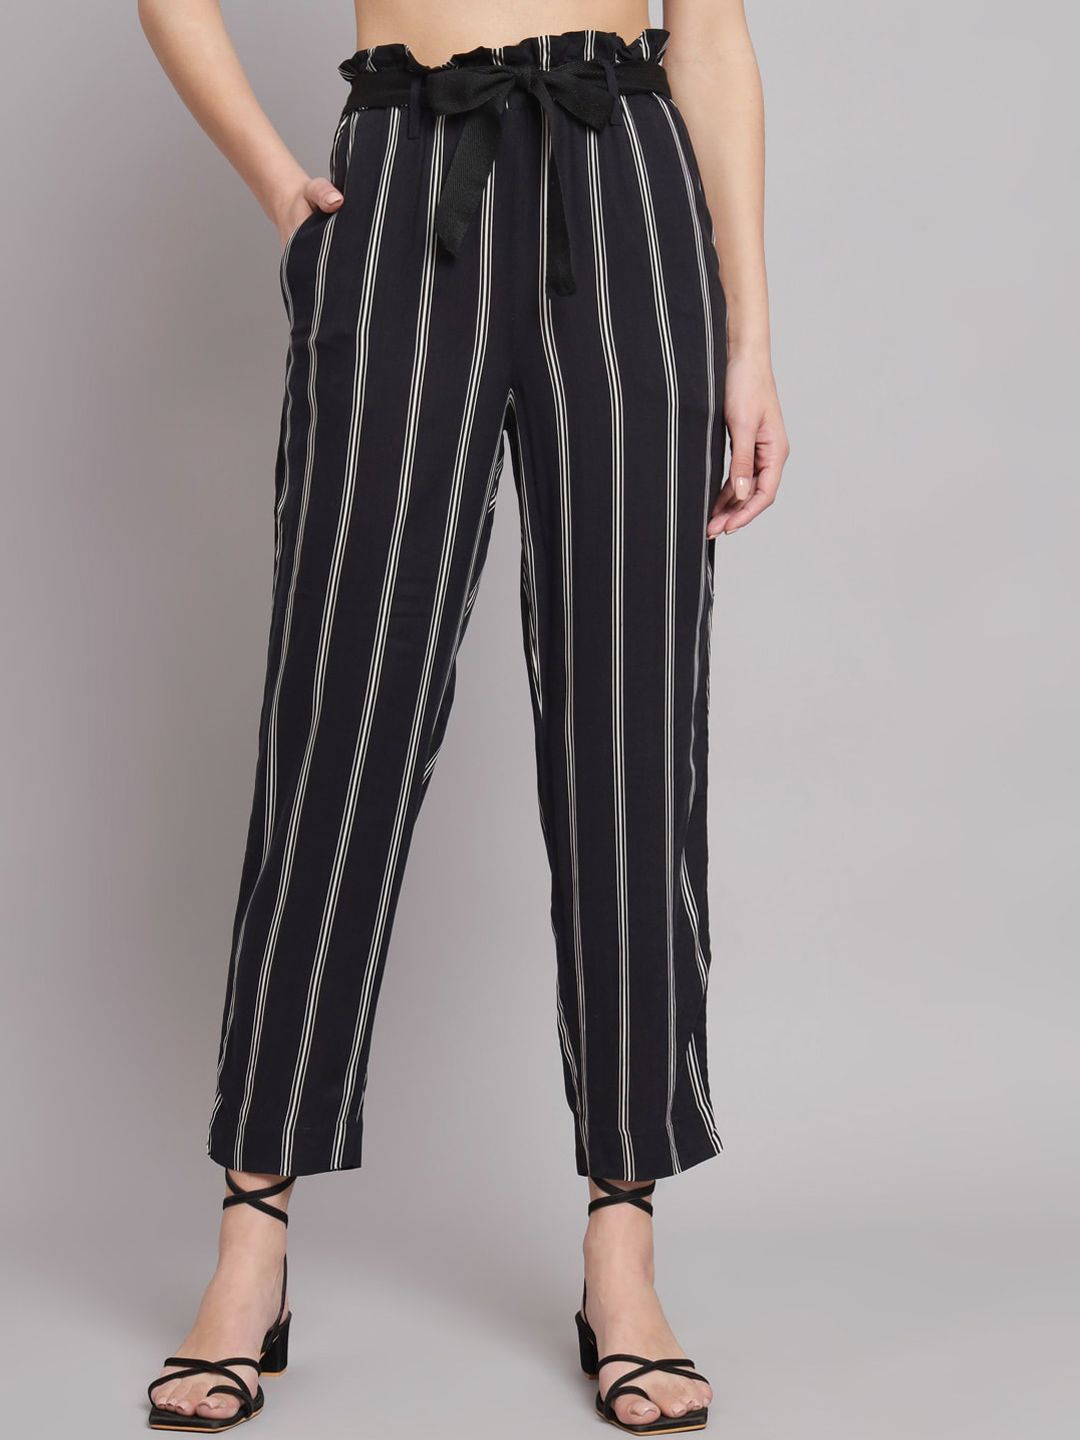 NoBarr Women Striped Trousers Price in India